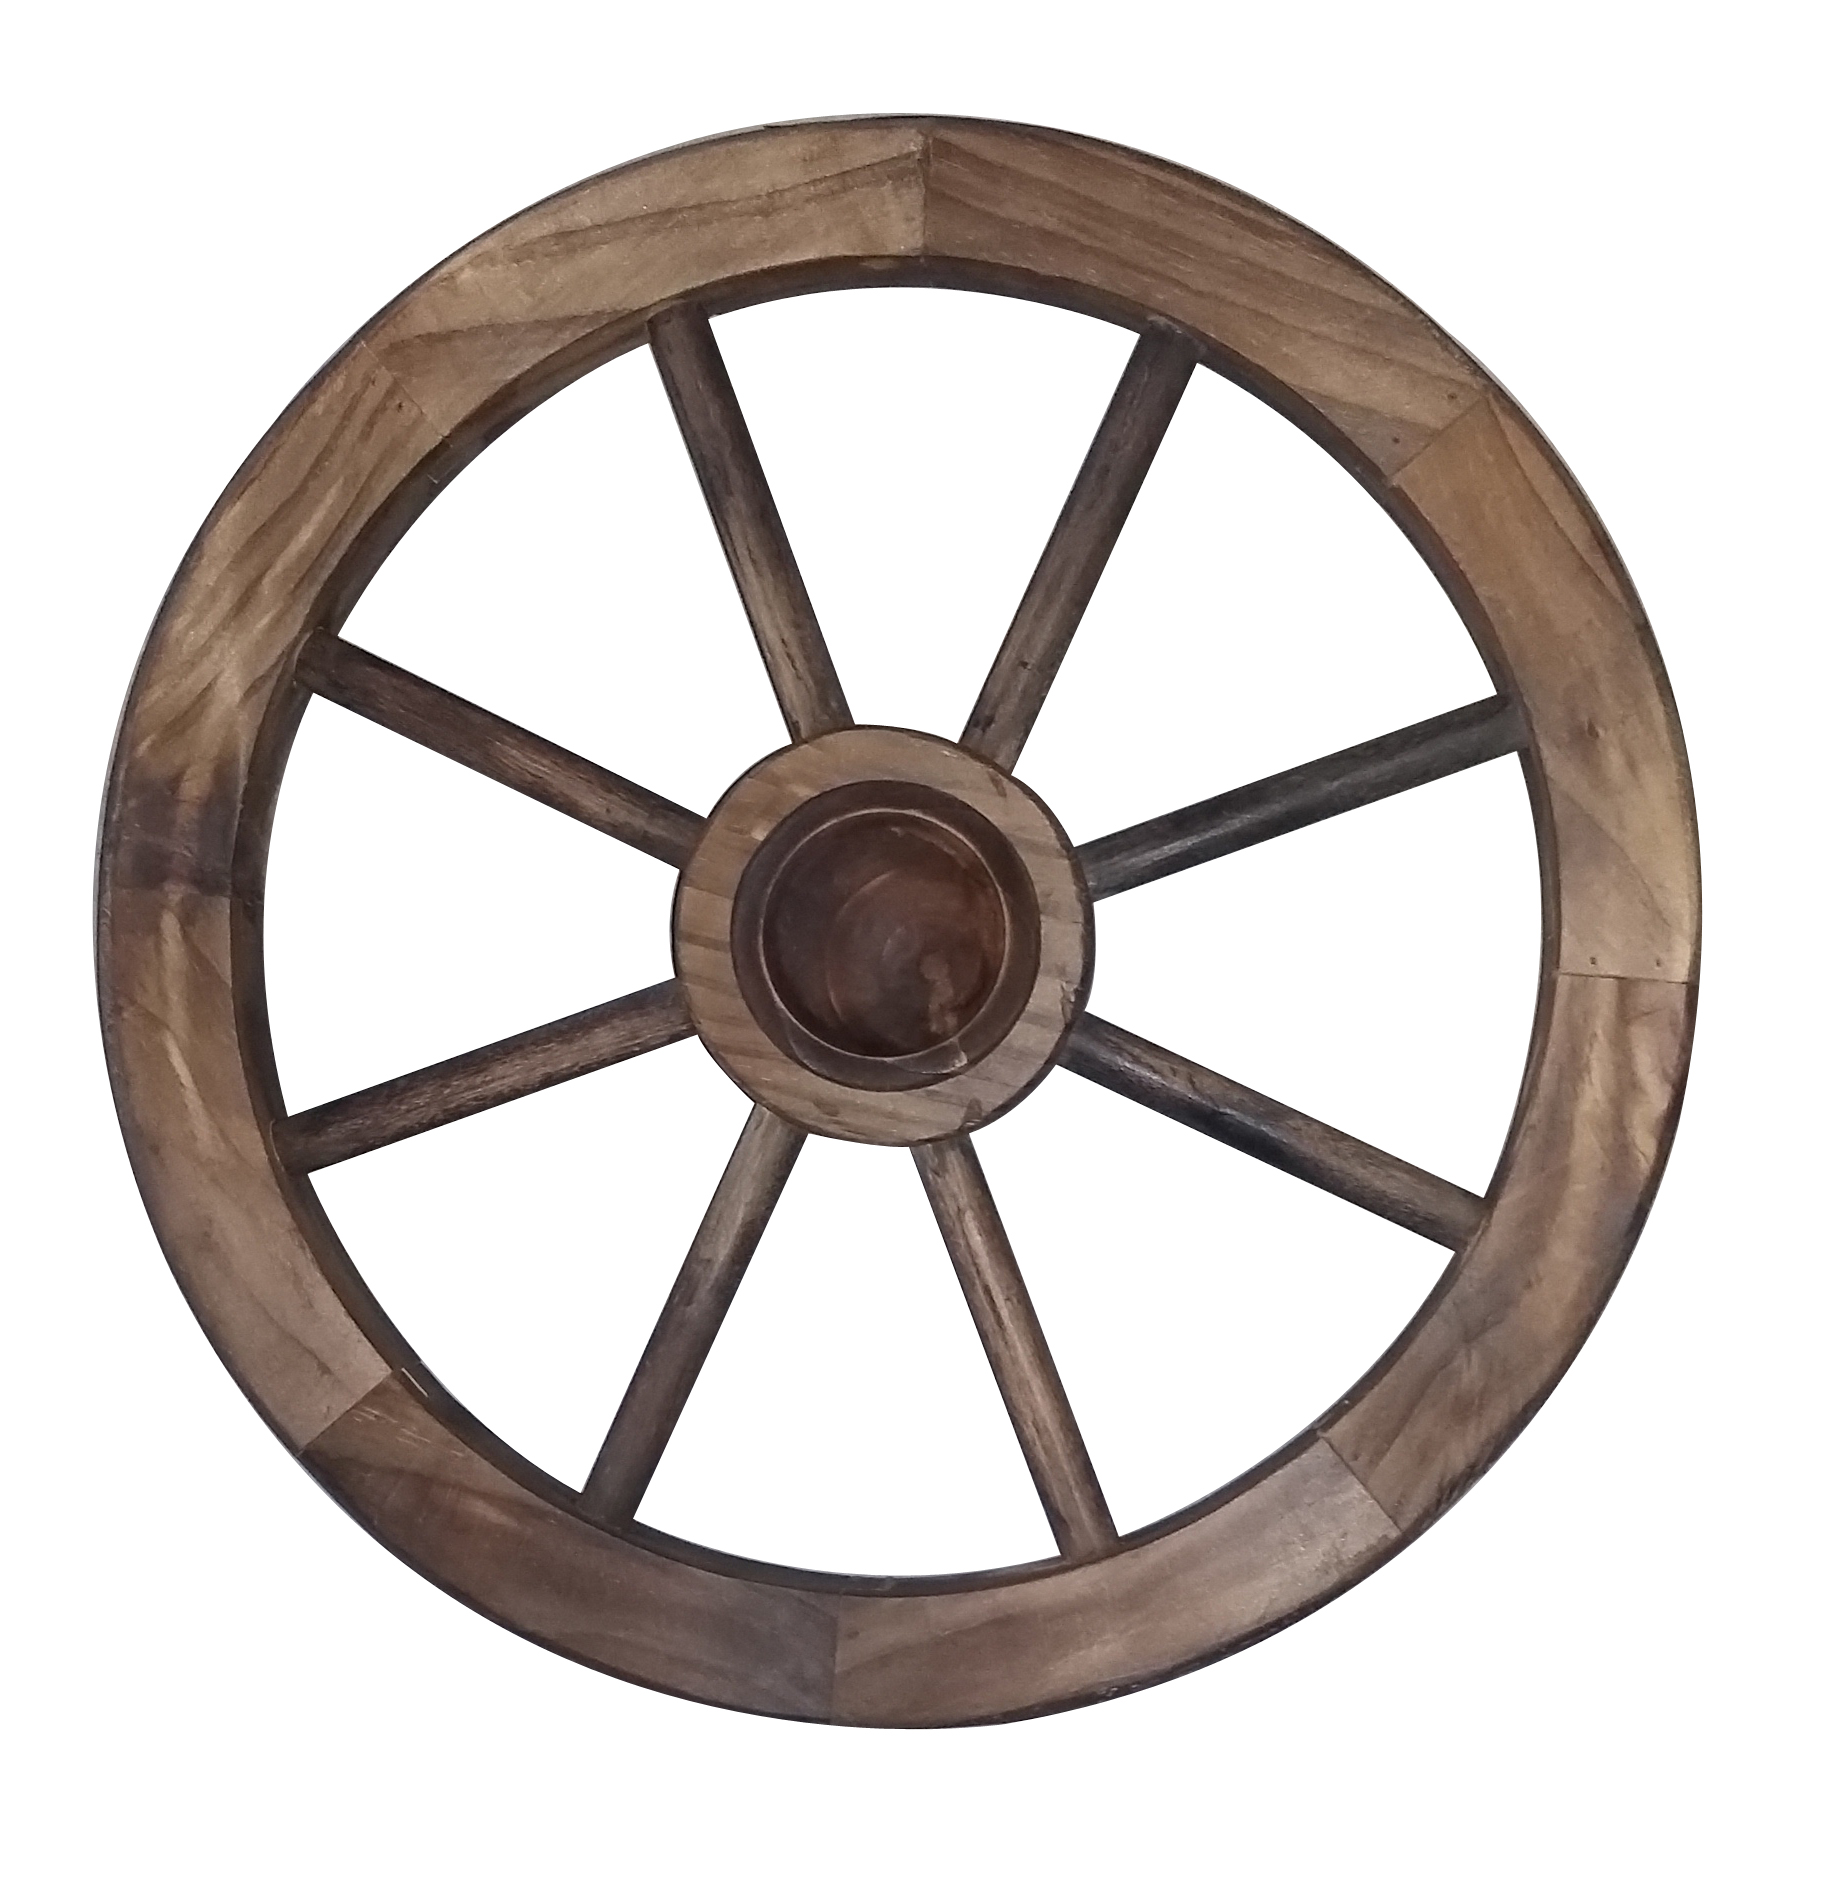 Leigh Country Eighteen Inch Decorative Wagon Wheel - image 2 of 7